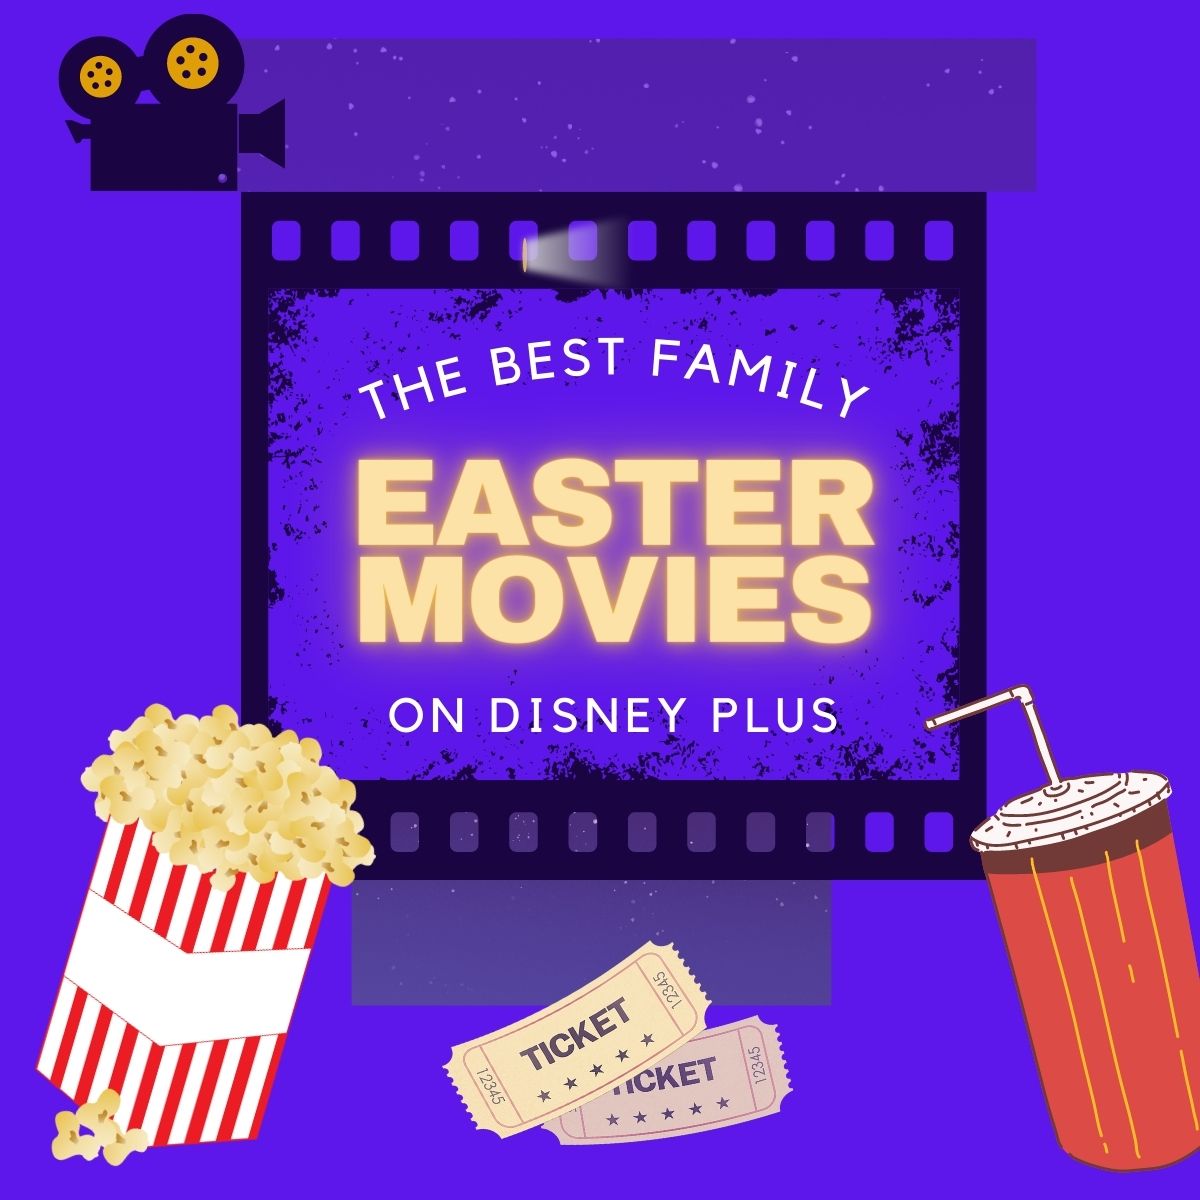 the best family easter movies on disney plus.